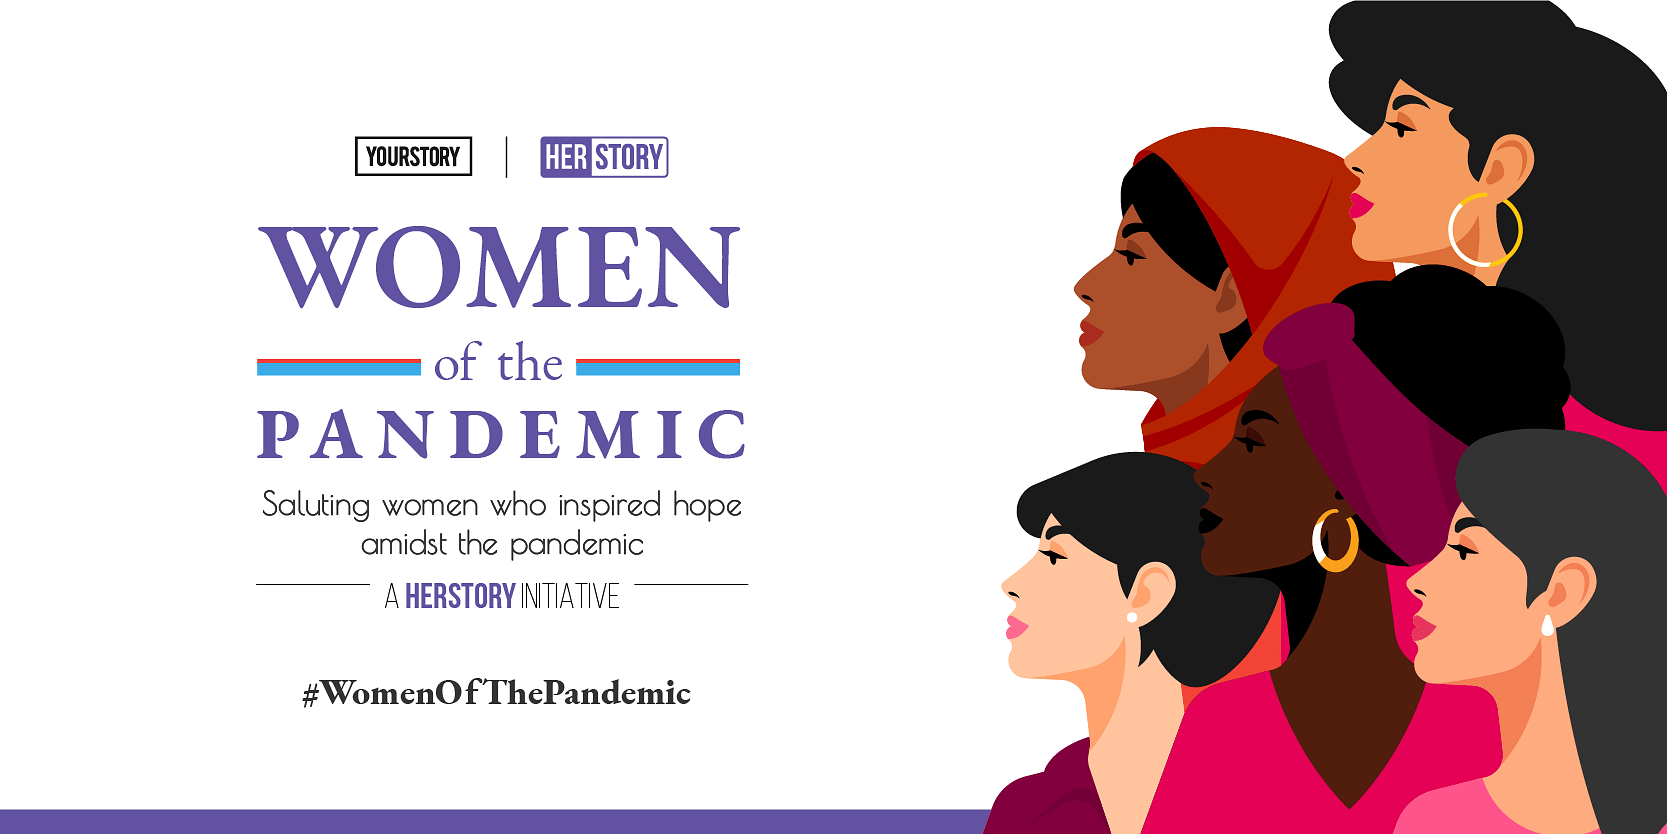 Women of the Pandemic: Namita Thapar says it’s important we do not forget the lessons learnt



